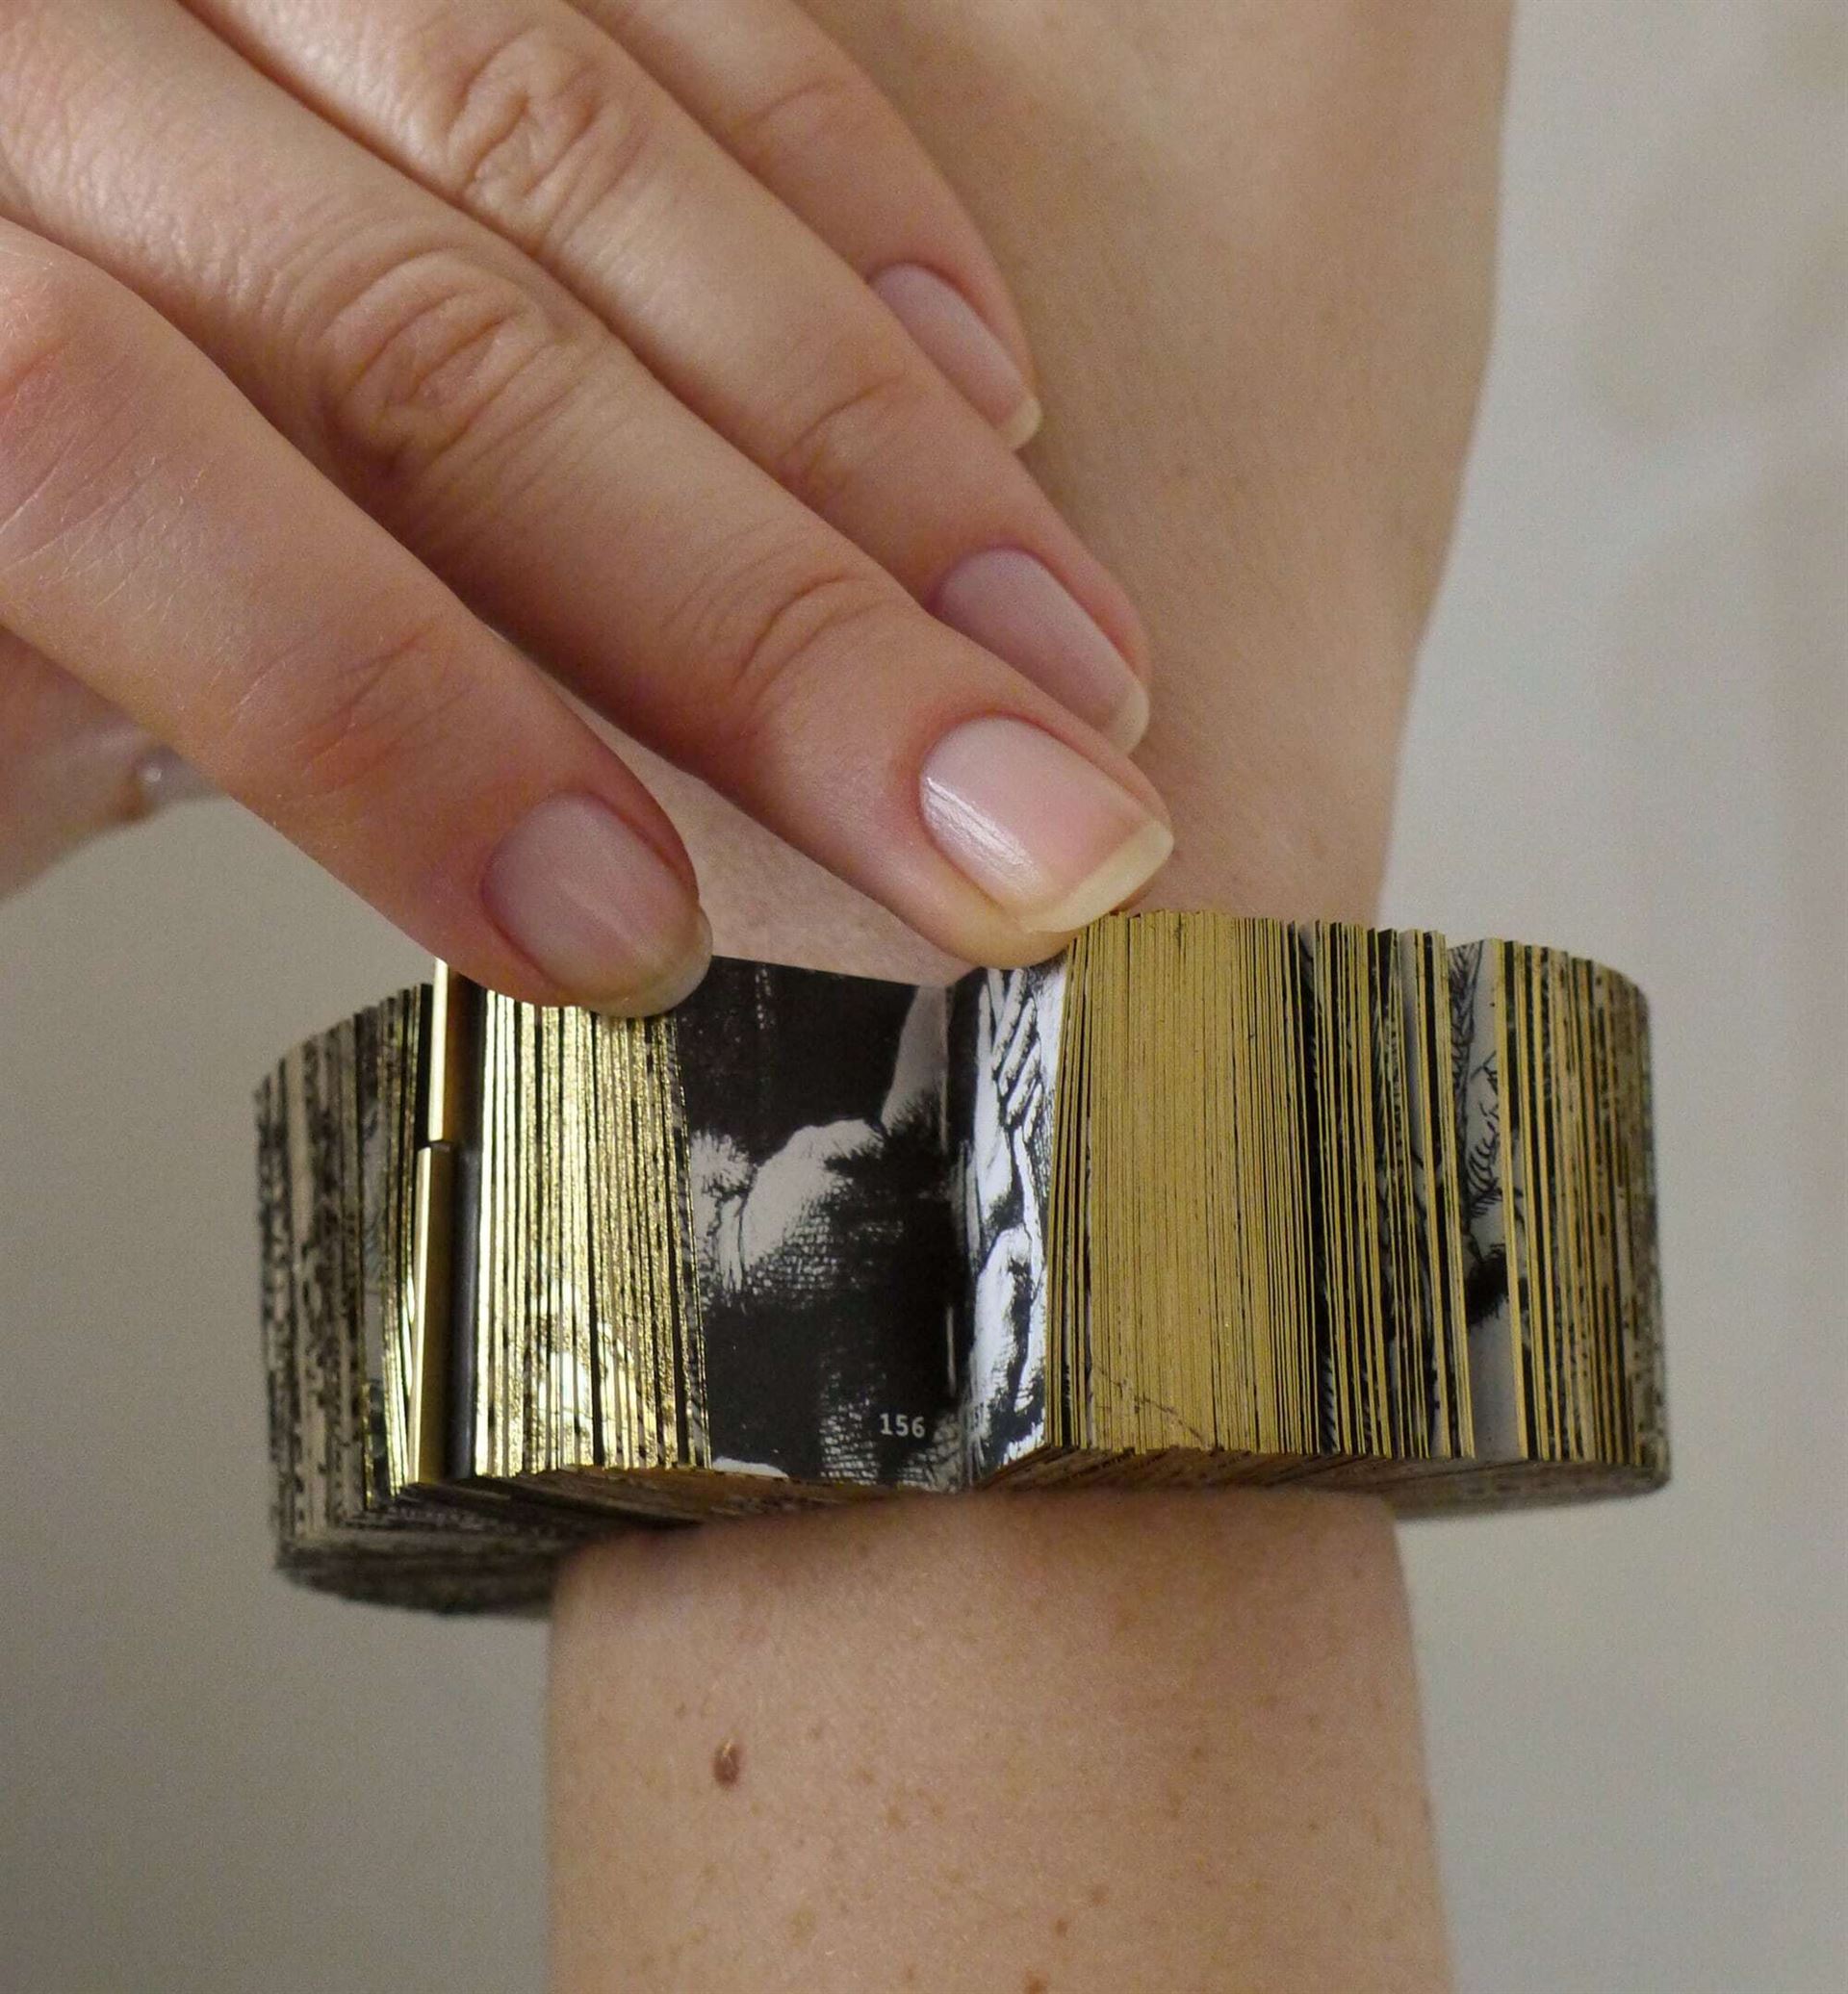 A photo of a bracelet made of thousands of printed pages